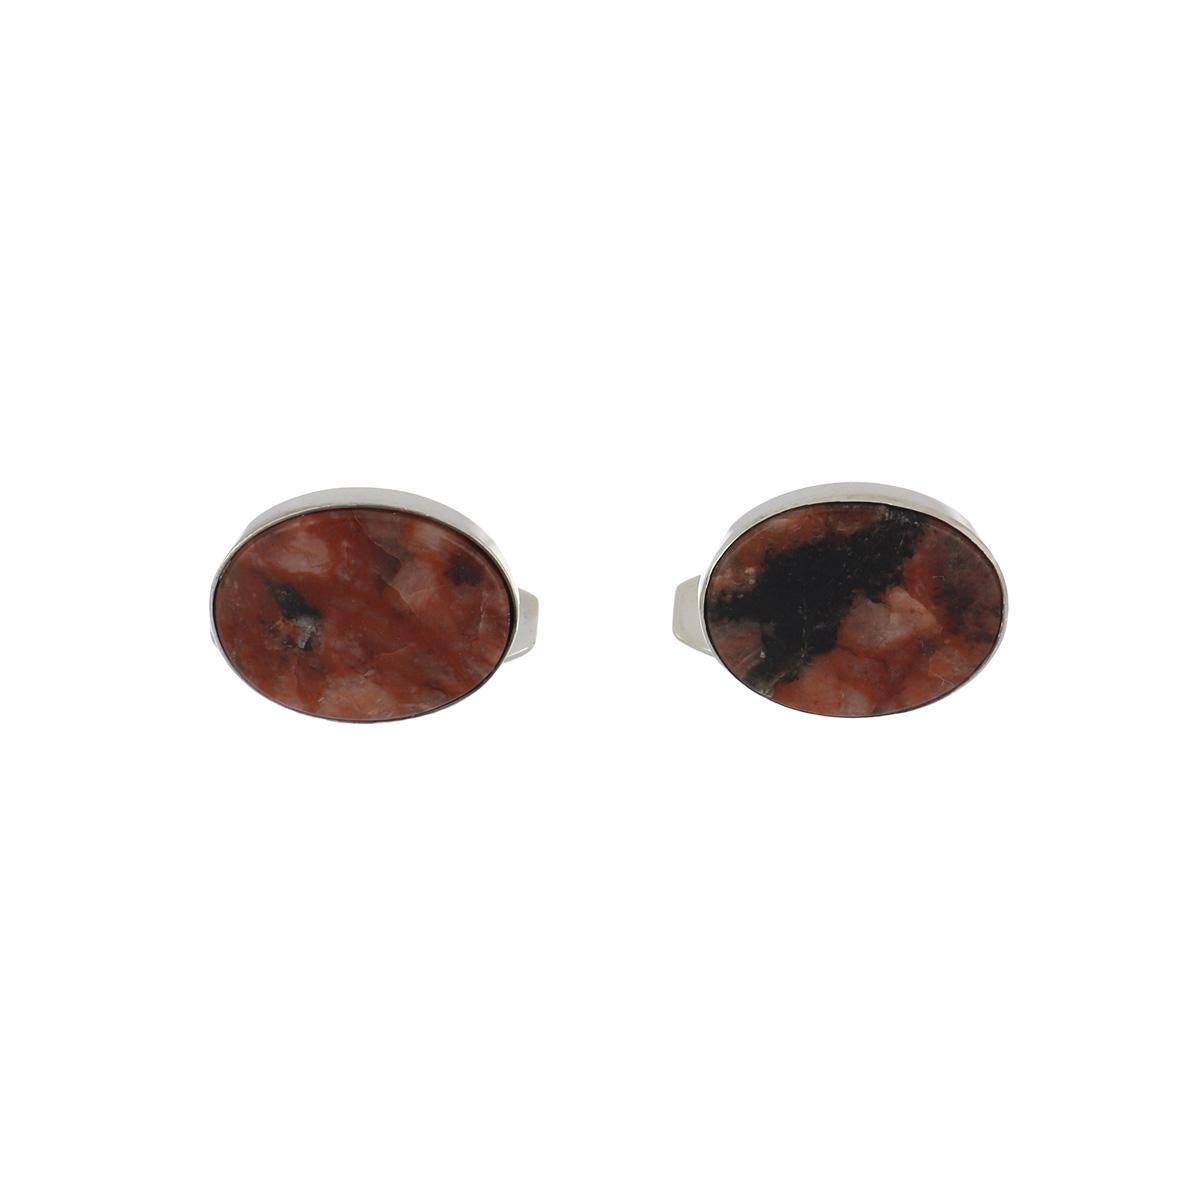 Retro Nels From cufflinks composed of sterling silver and pink granite. Danish, circa 1940.